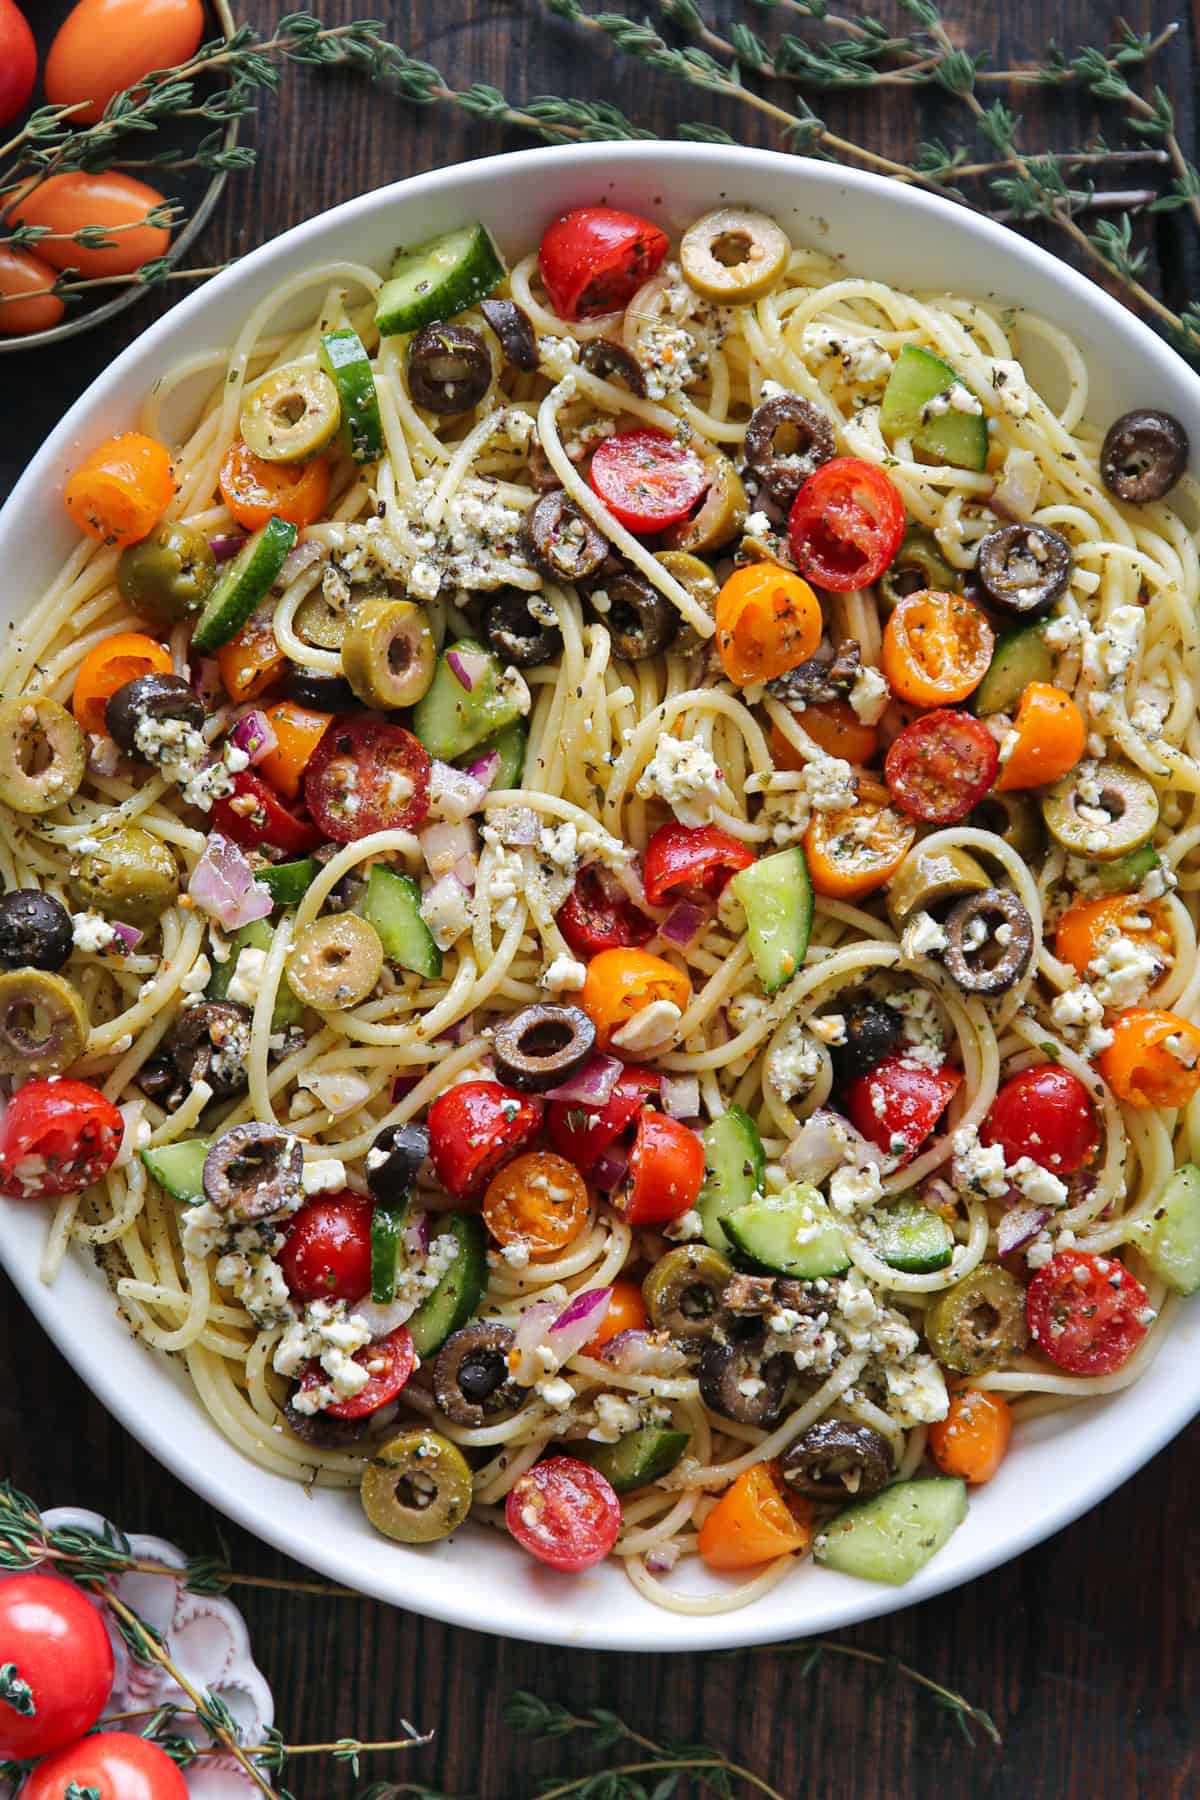 Spaghetti pasta with cherry tomatoes, olives, cucumber, red onions, and feta cheese - in a white bowl.